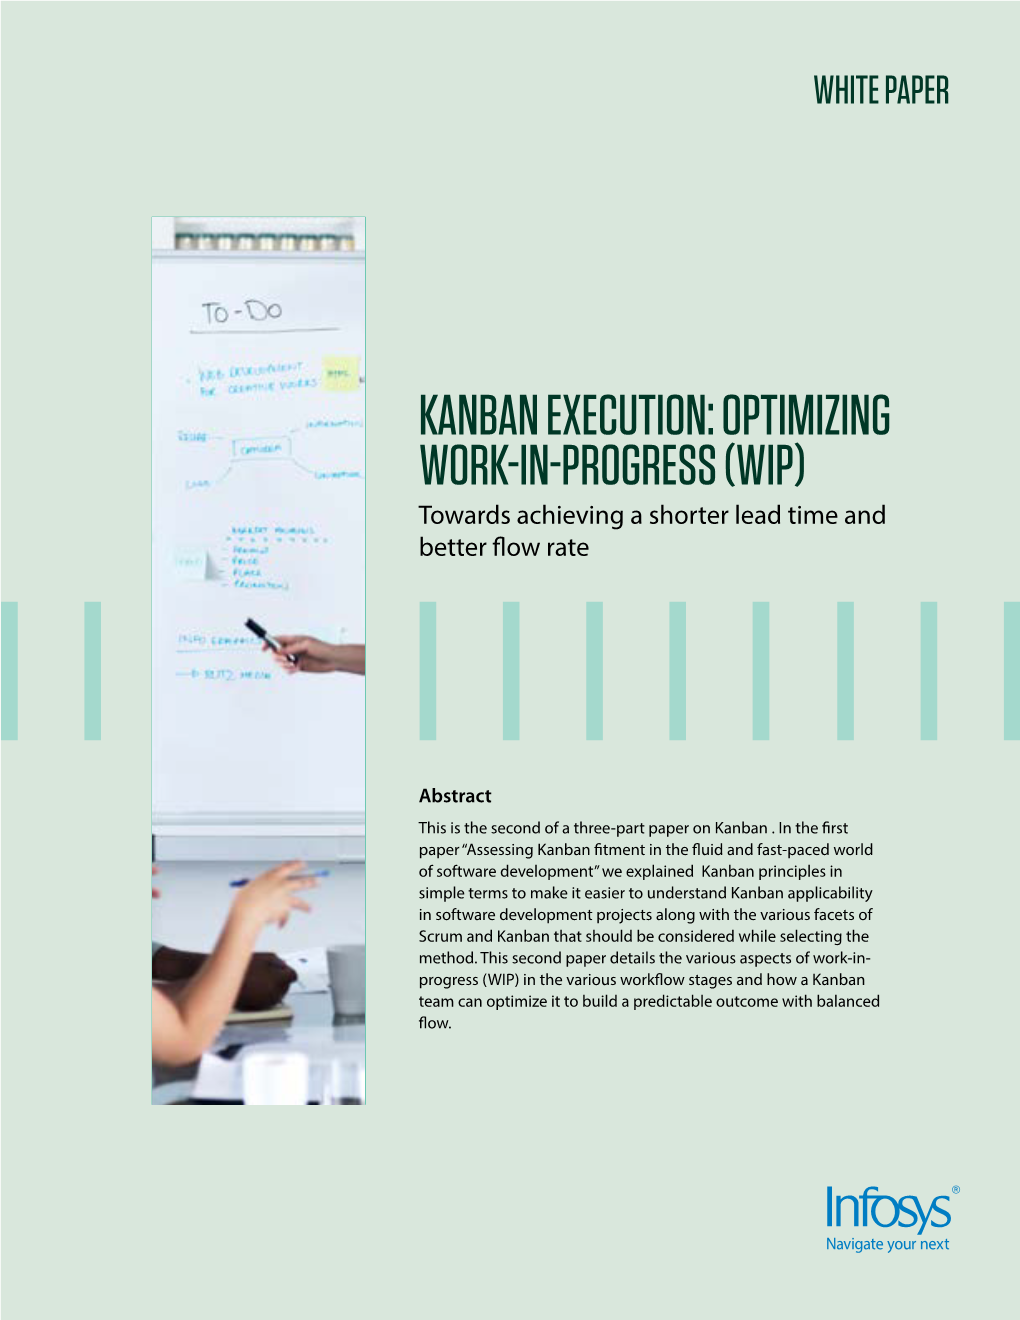 KANBAN EXECUTION: OPTIMIZING WORK-IN-PROGRESS (WIP) Towards Achieving a Shorter Lead Time and Better Flow Rate